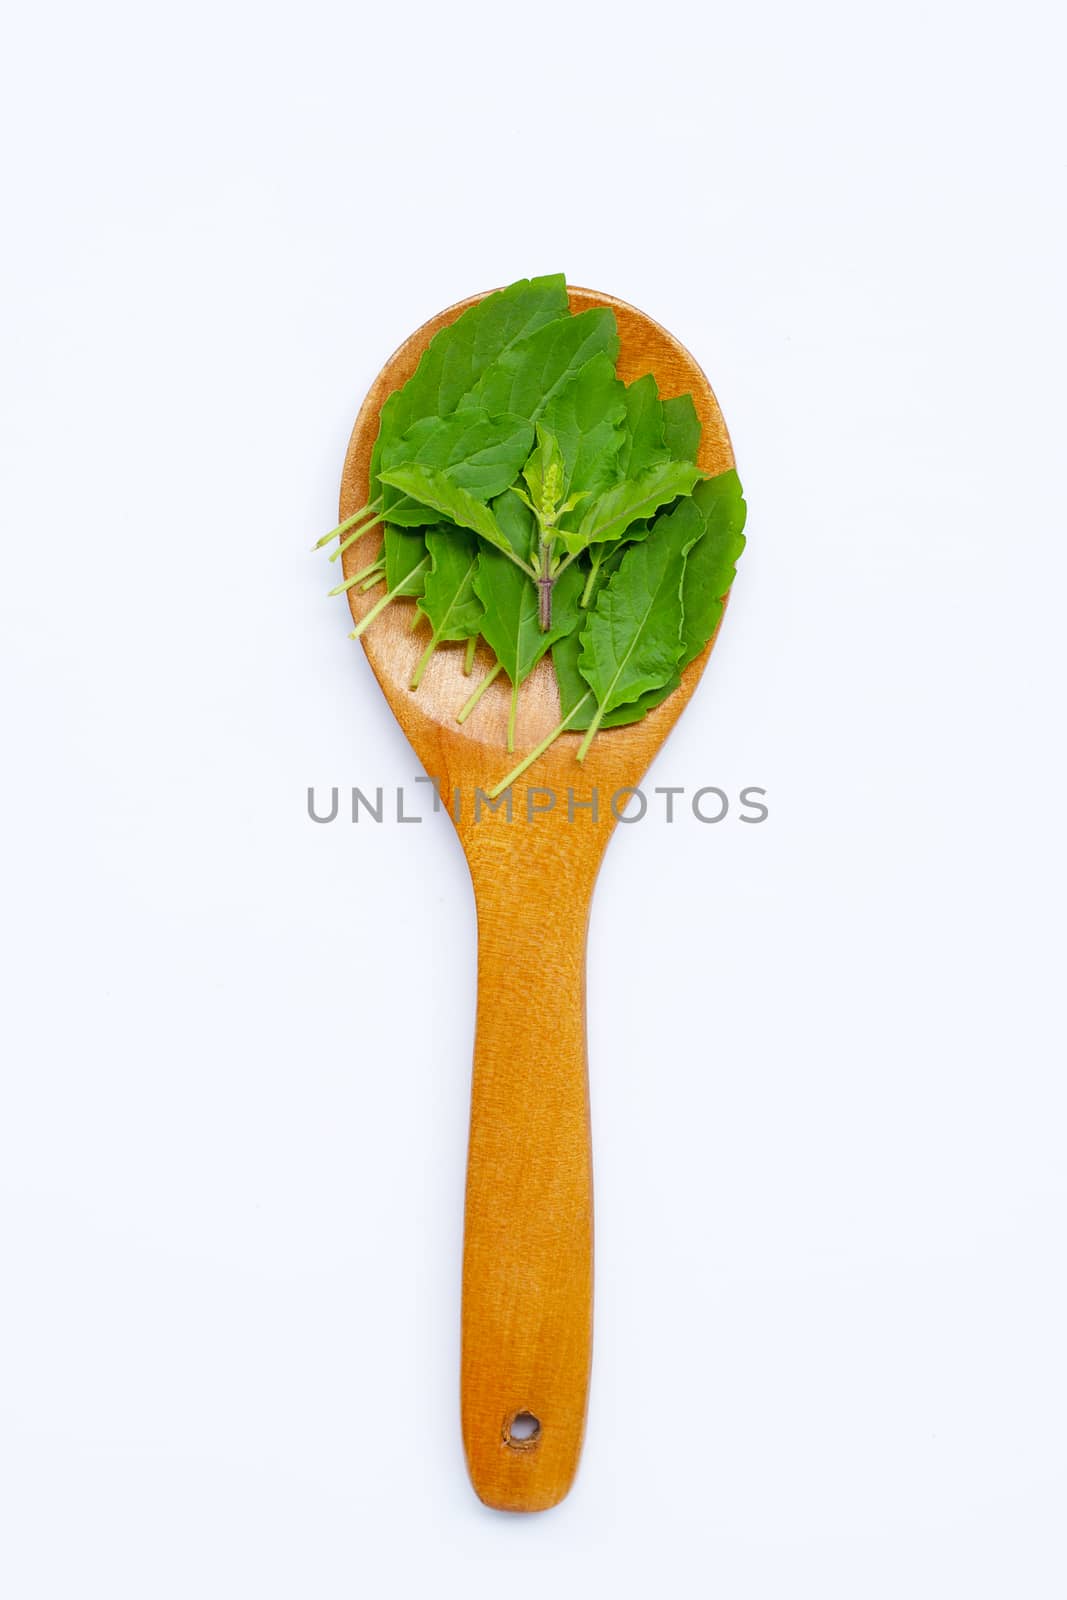 Holy basil leaves on wooden spoon on white backgrond.